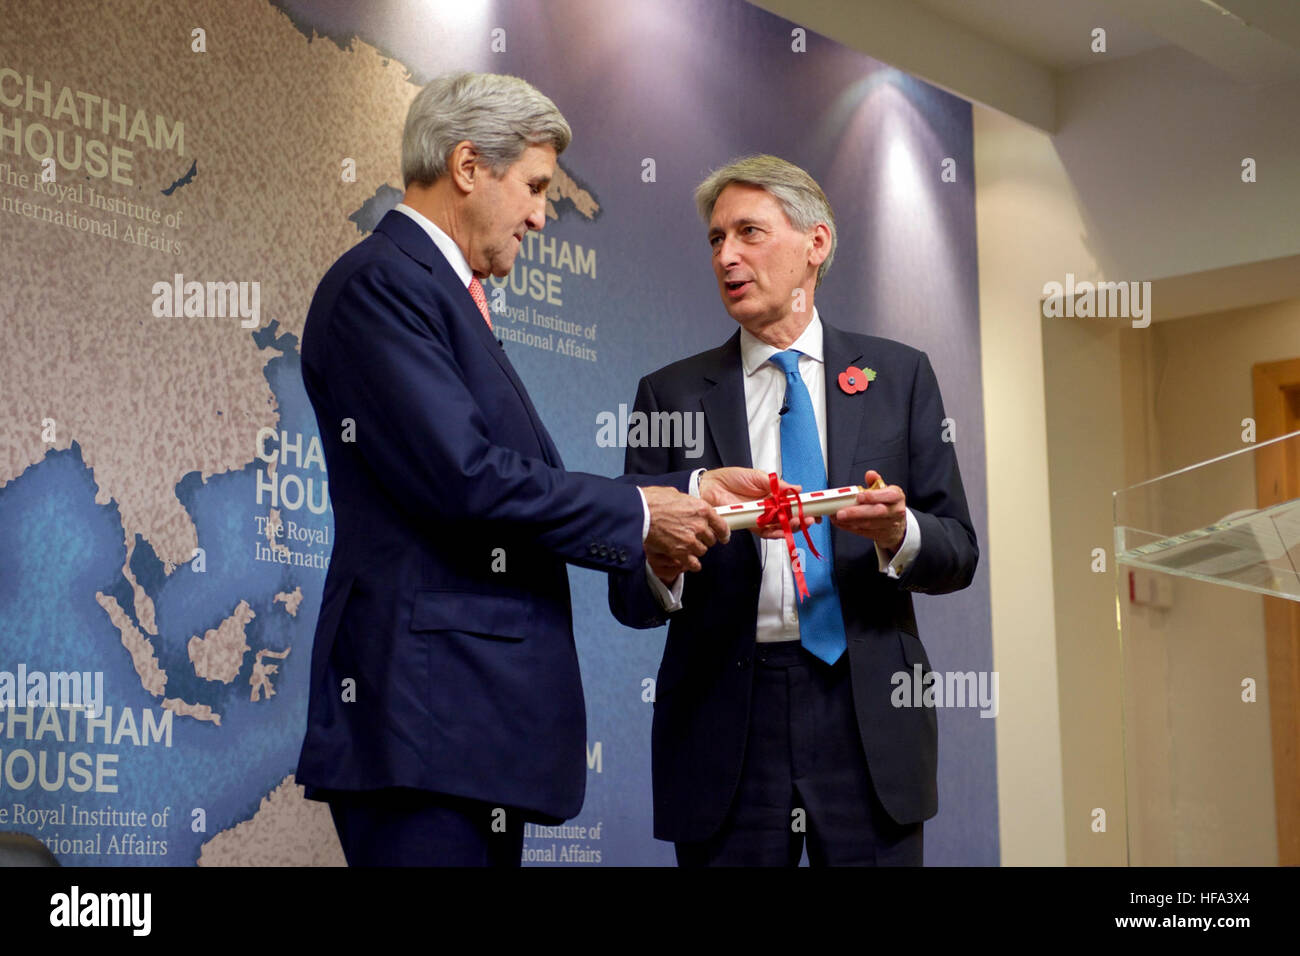 British Chancellor of the Exchequer Philip Hammond presents U.S. Secretary of State John Kerry with the Chatham House Prize in tandem with Iranian Foreign Minister Javad Zarif at the headquarters of the famed international think-tank in London, U.K., on October 31, 2016. Stock Photo